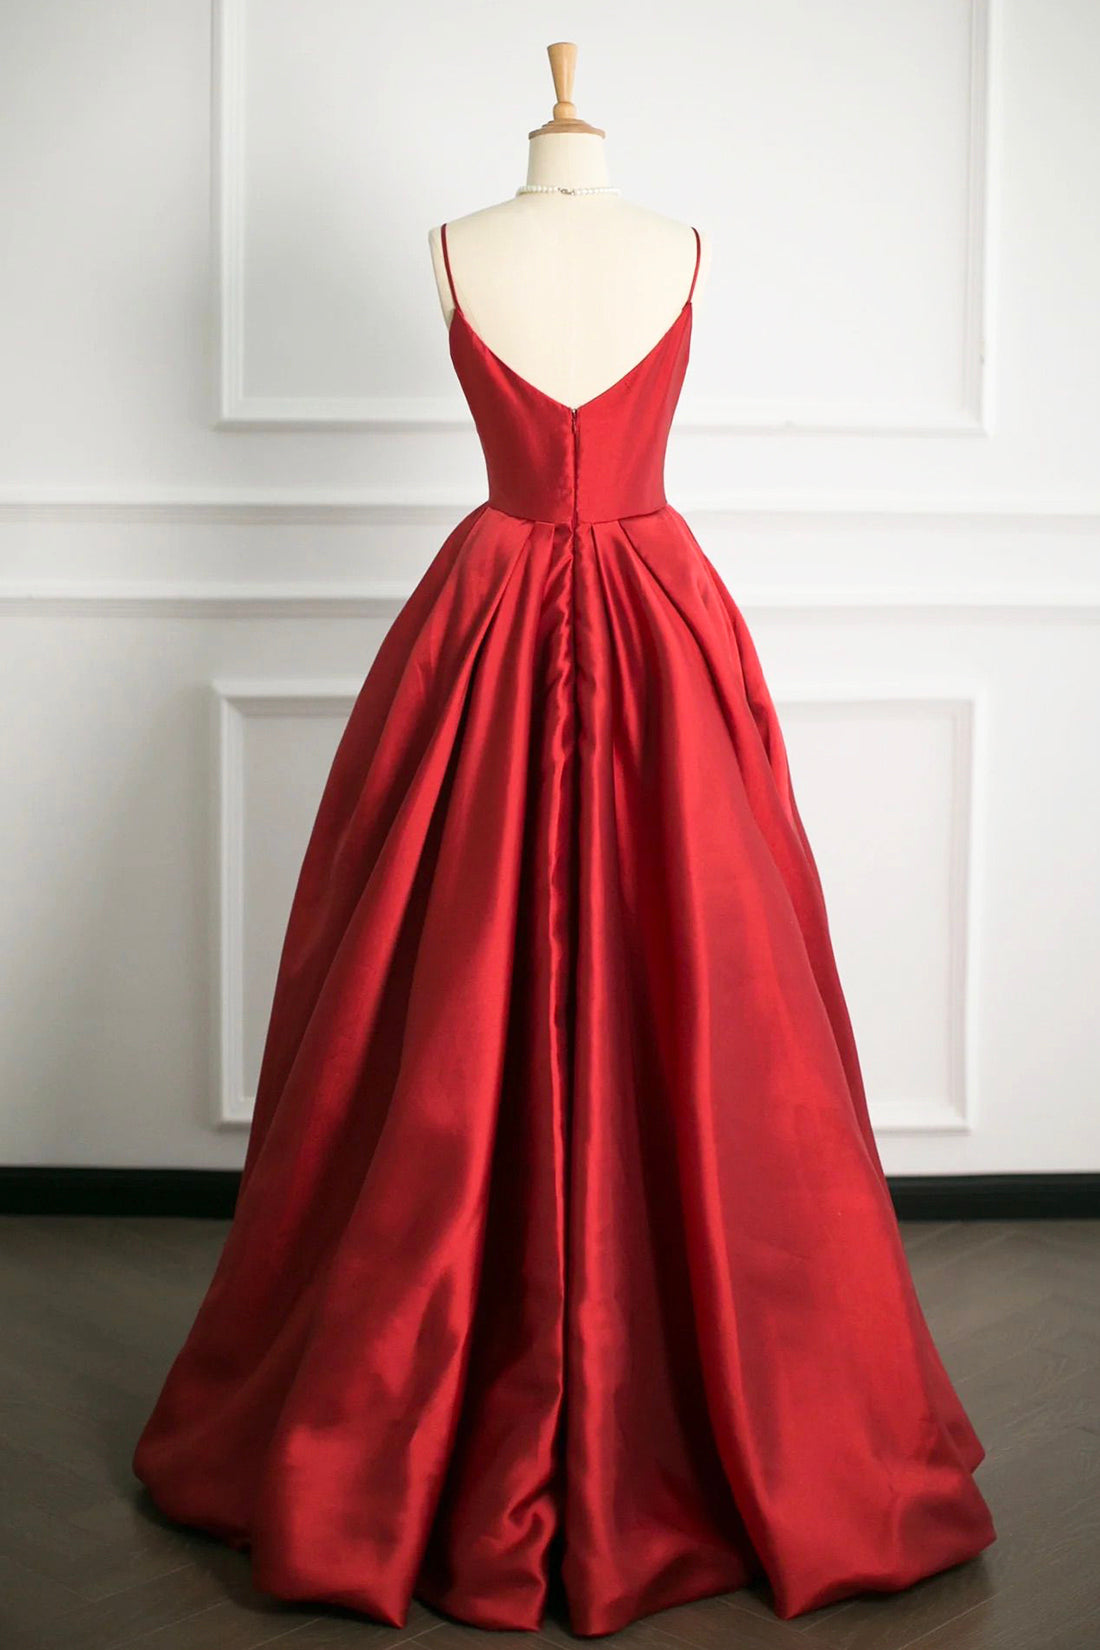 Red V-Neck Satin Long A-Line Prom Dress, Simple A-Line Backless Evening Party Dress